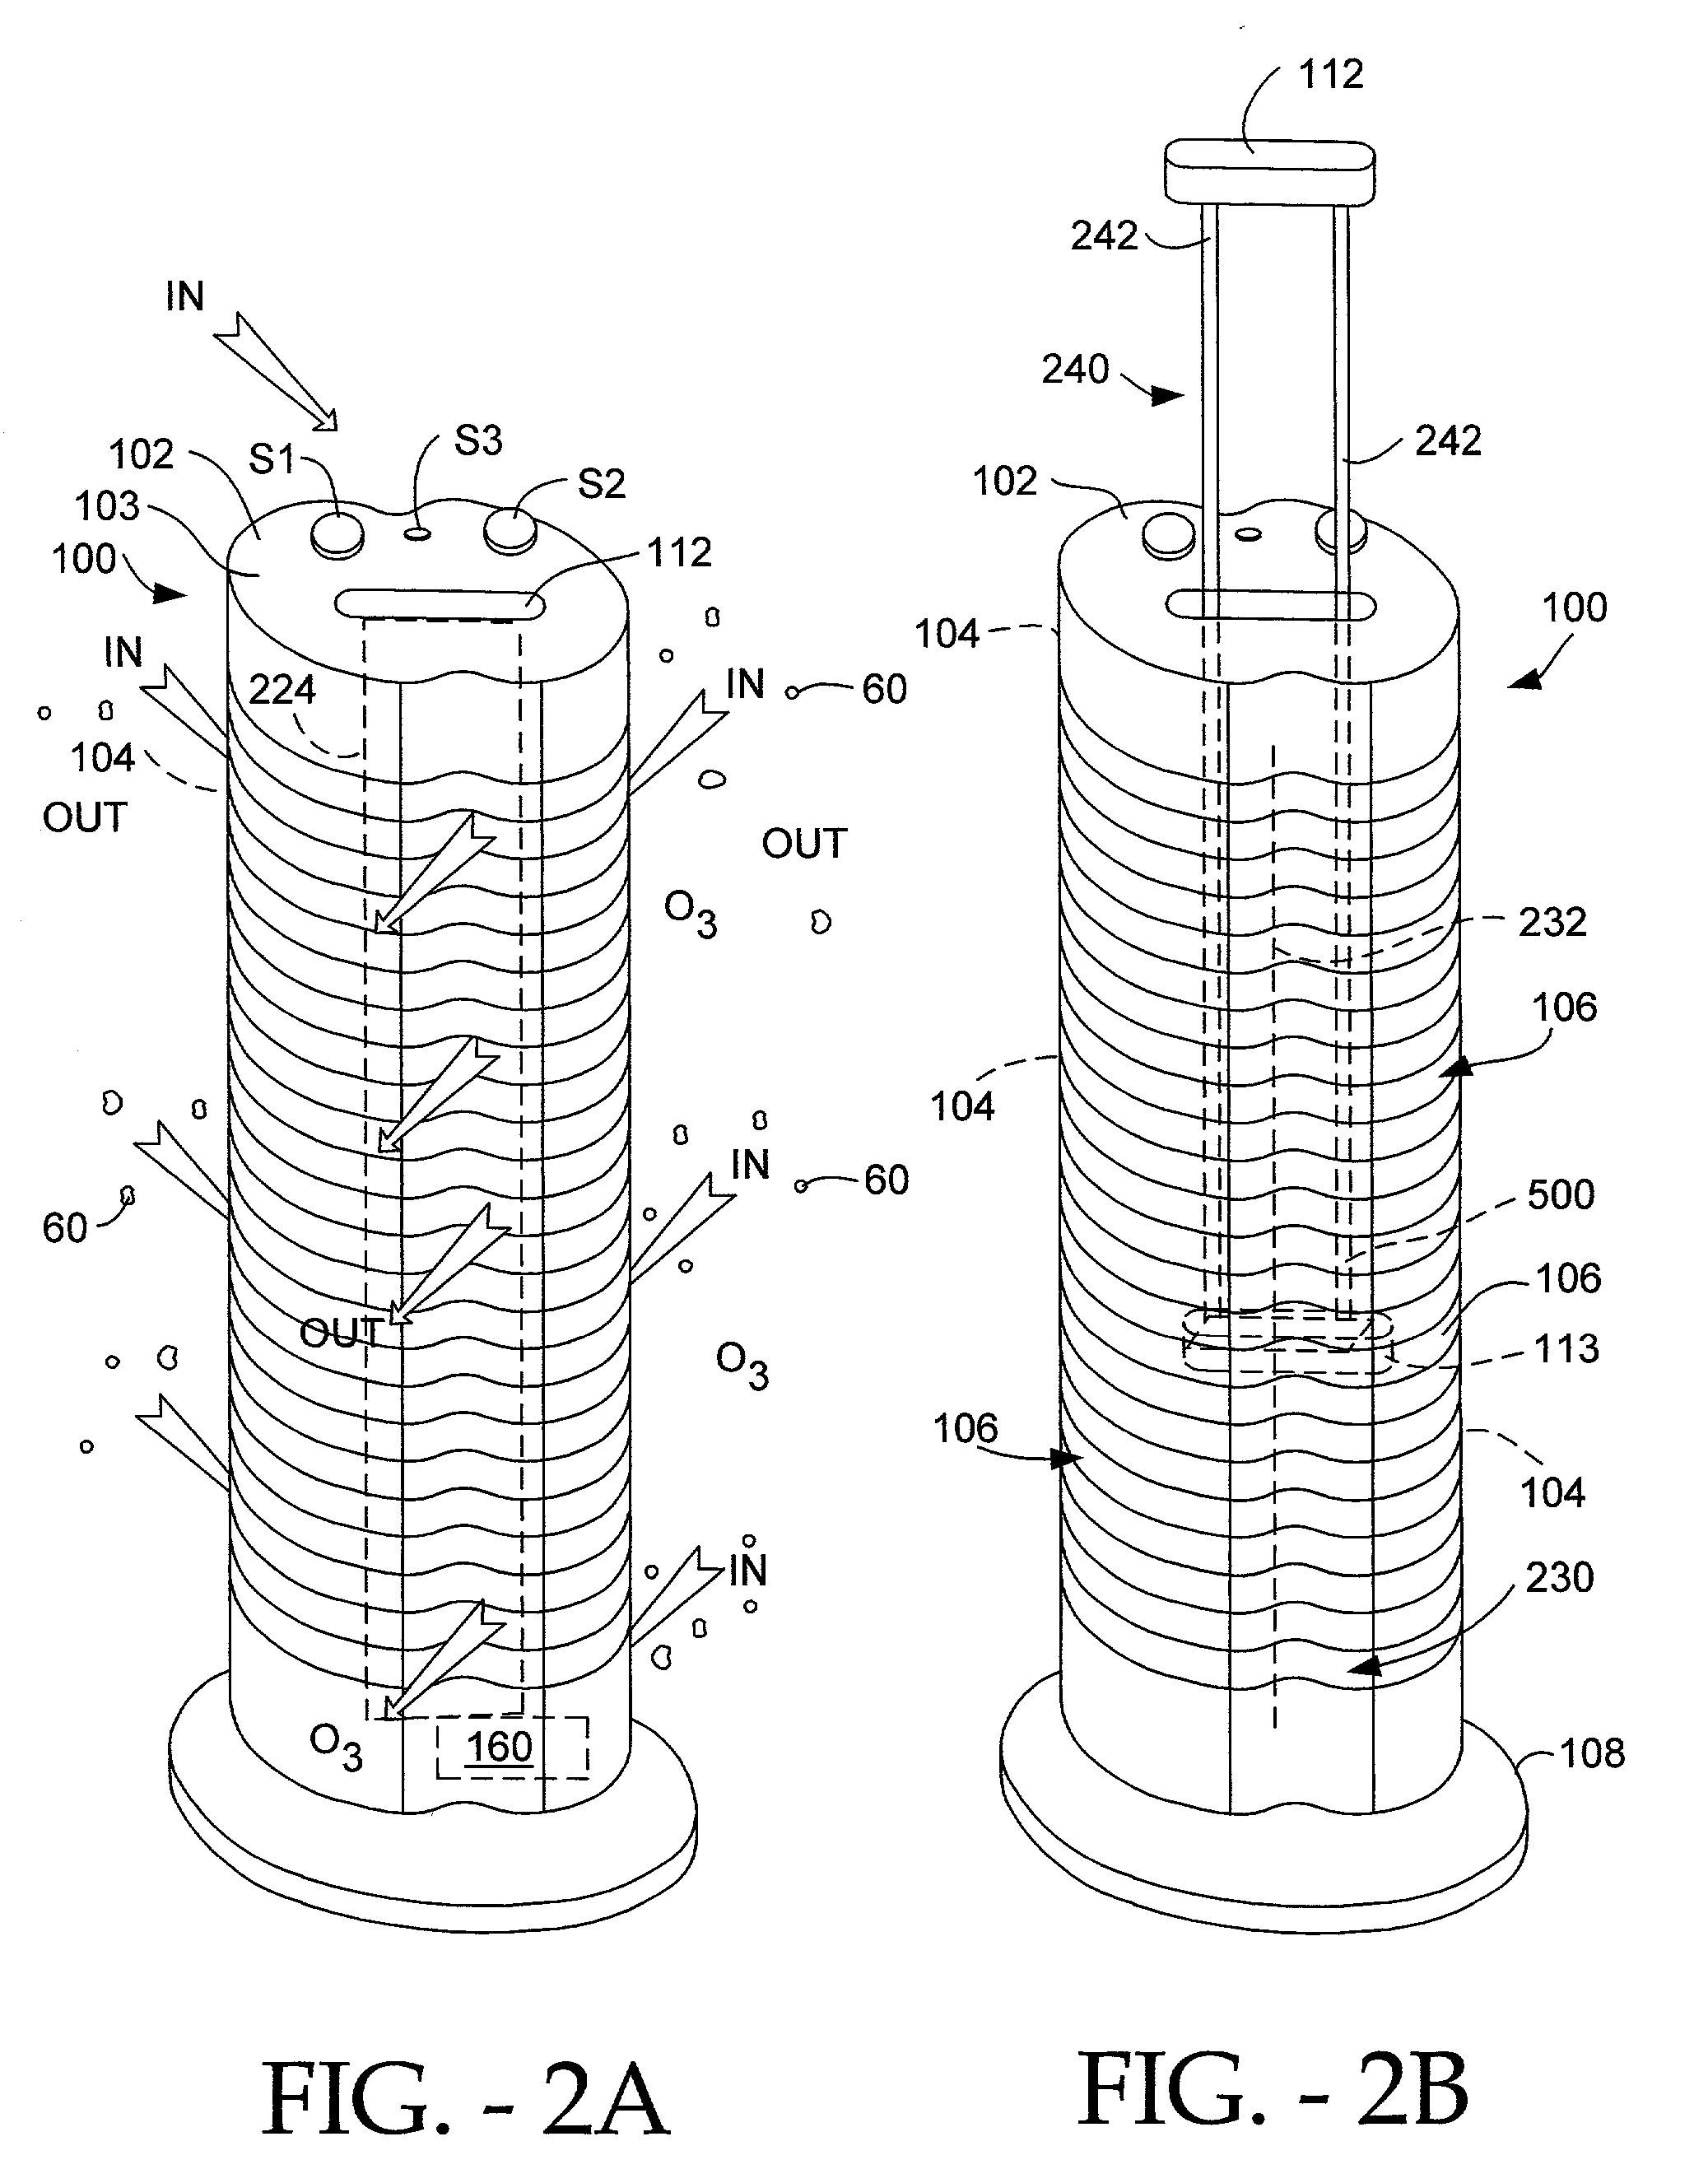 Electro-kinetic air transporter and conditioner device with enhanced maintenance features and enhanced anti-microorganism capability